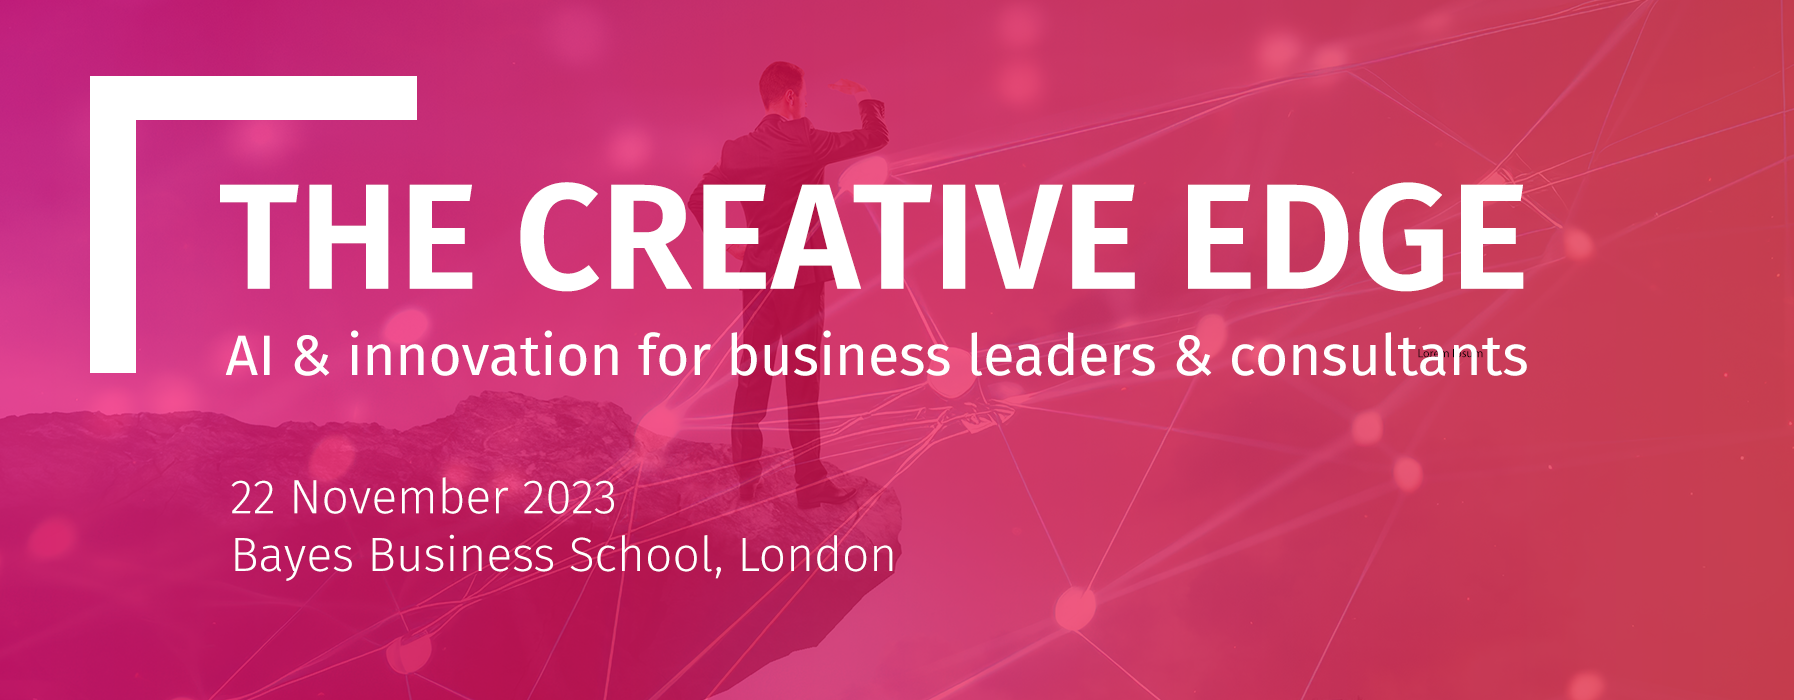 The Creative Edge: AI & innovation for business leaders and consultants